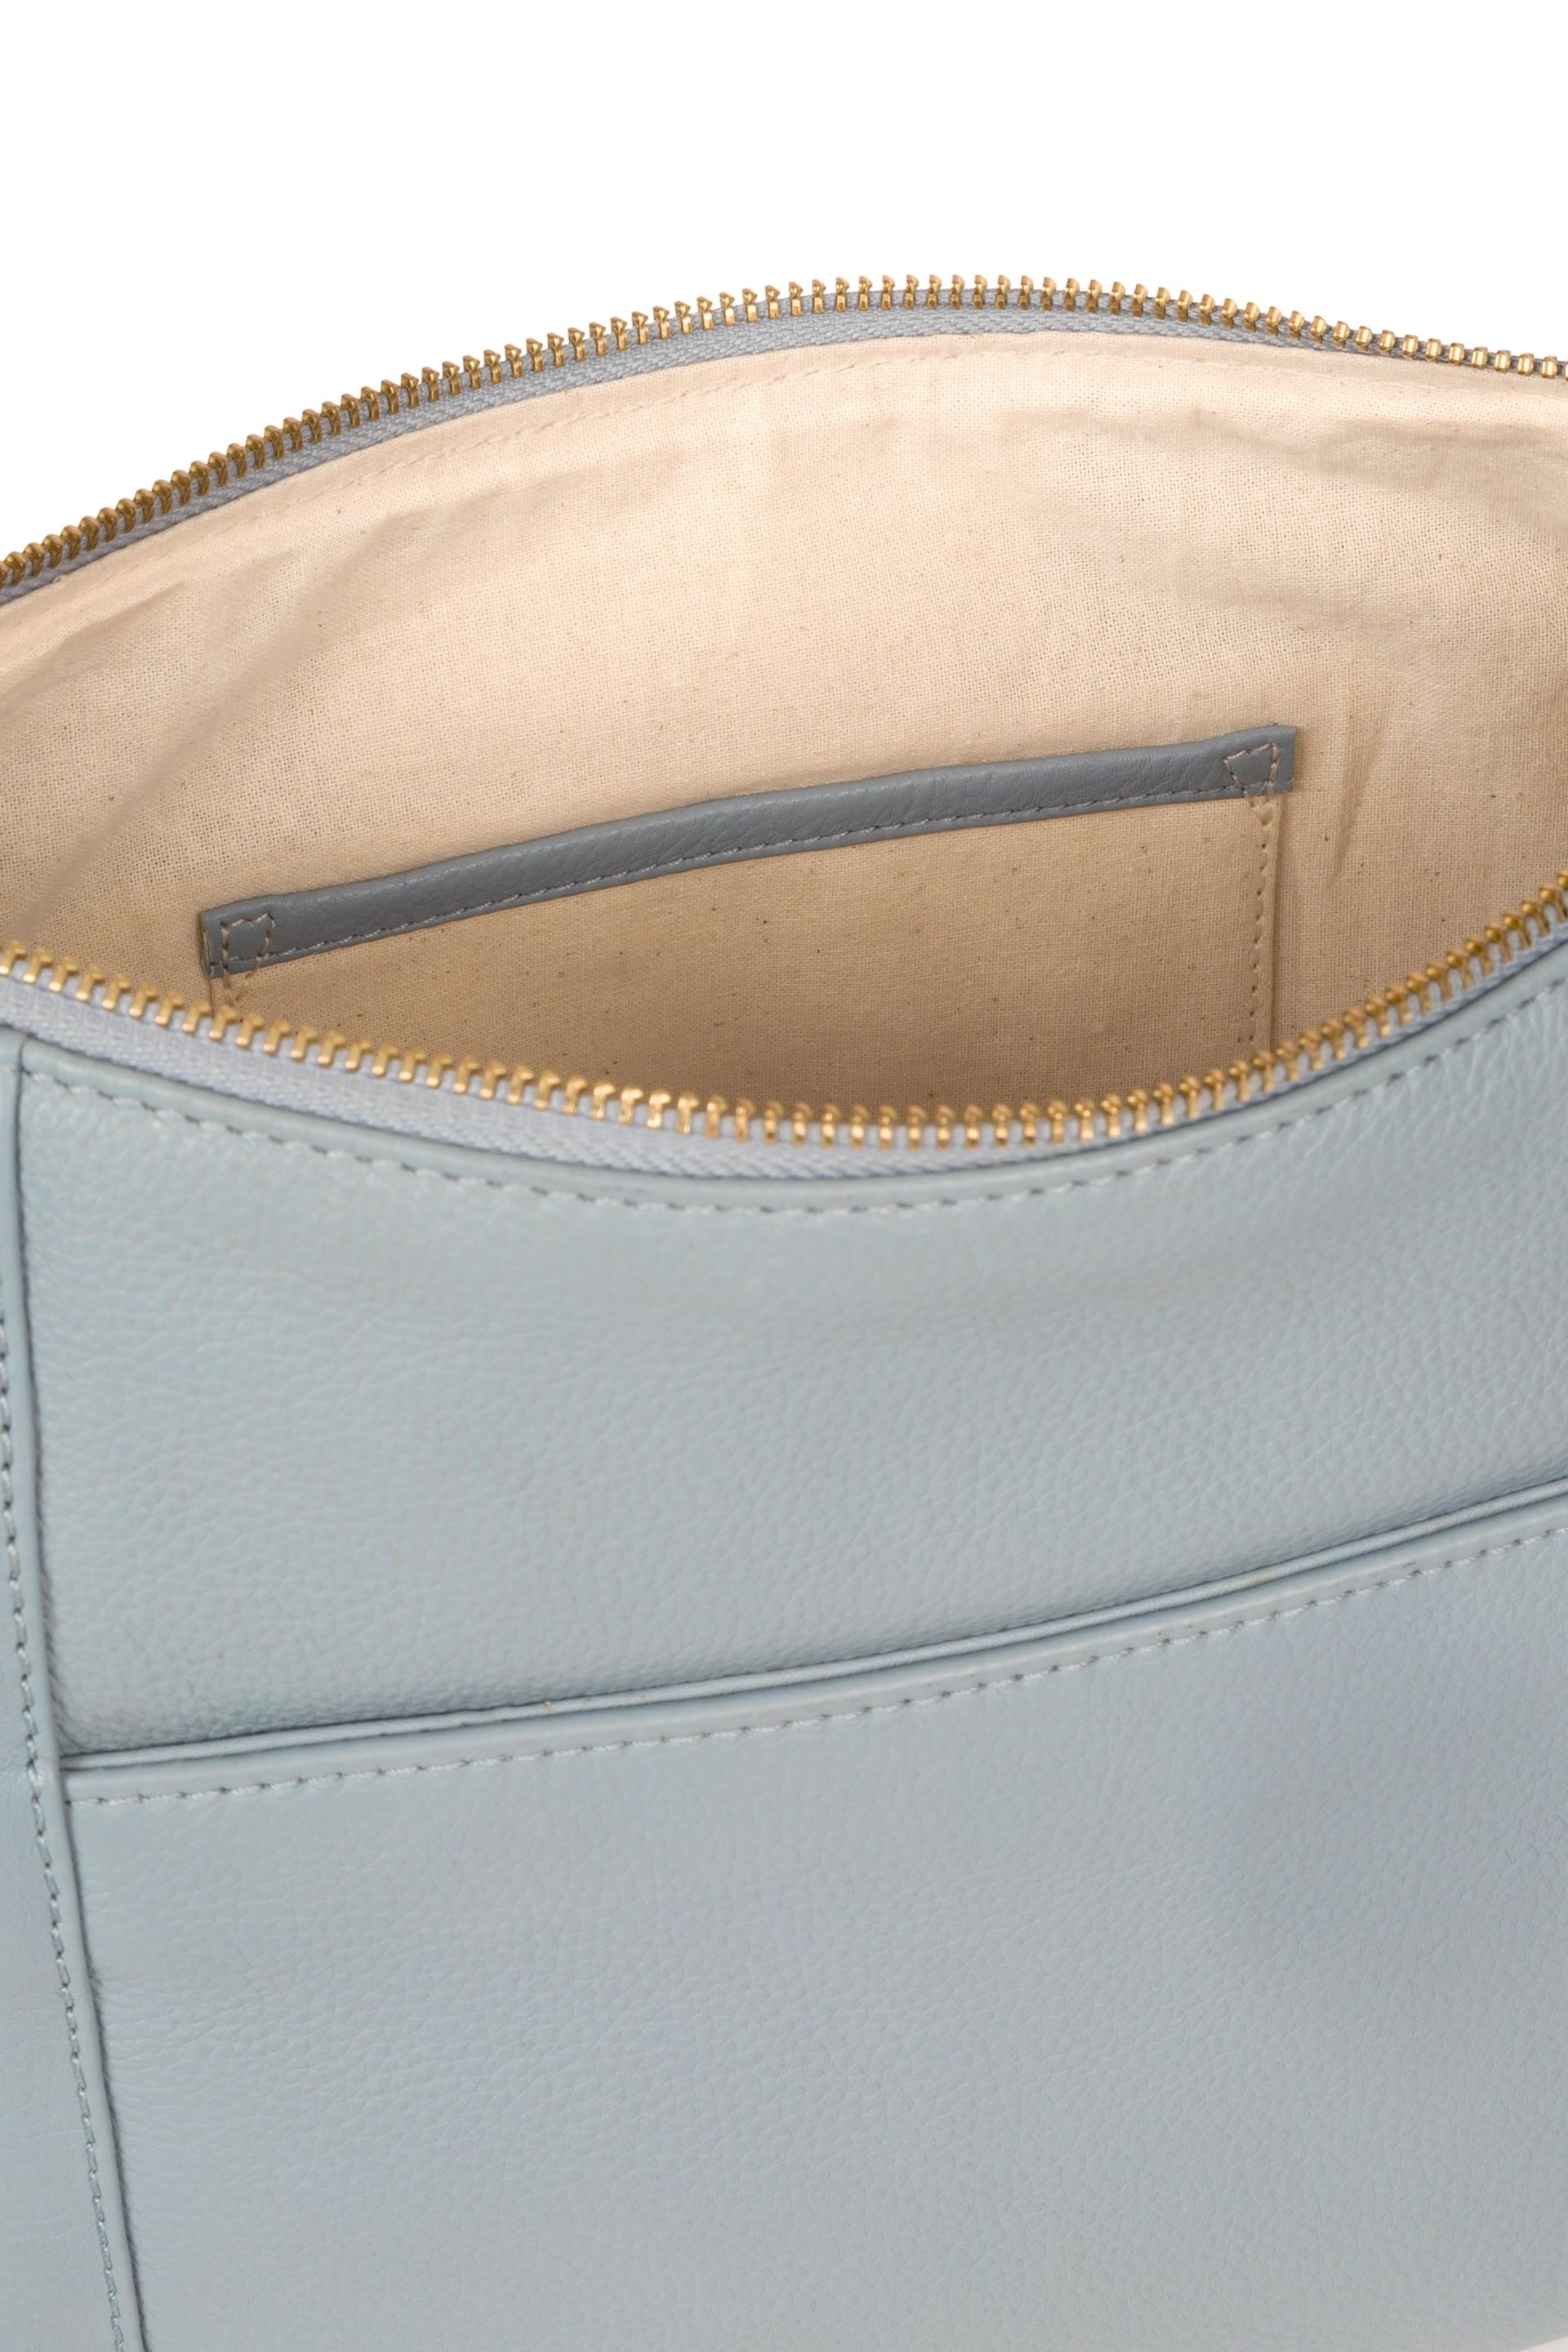 Pure Luxuries London Jenna Leather Shoulder Bag - Image 5 of 6